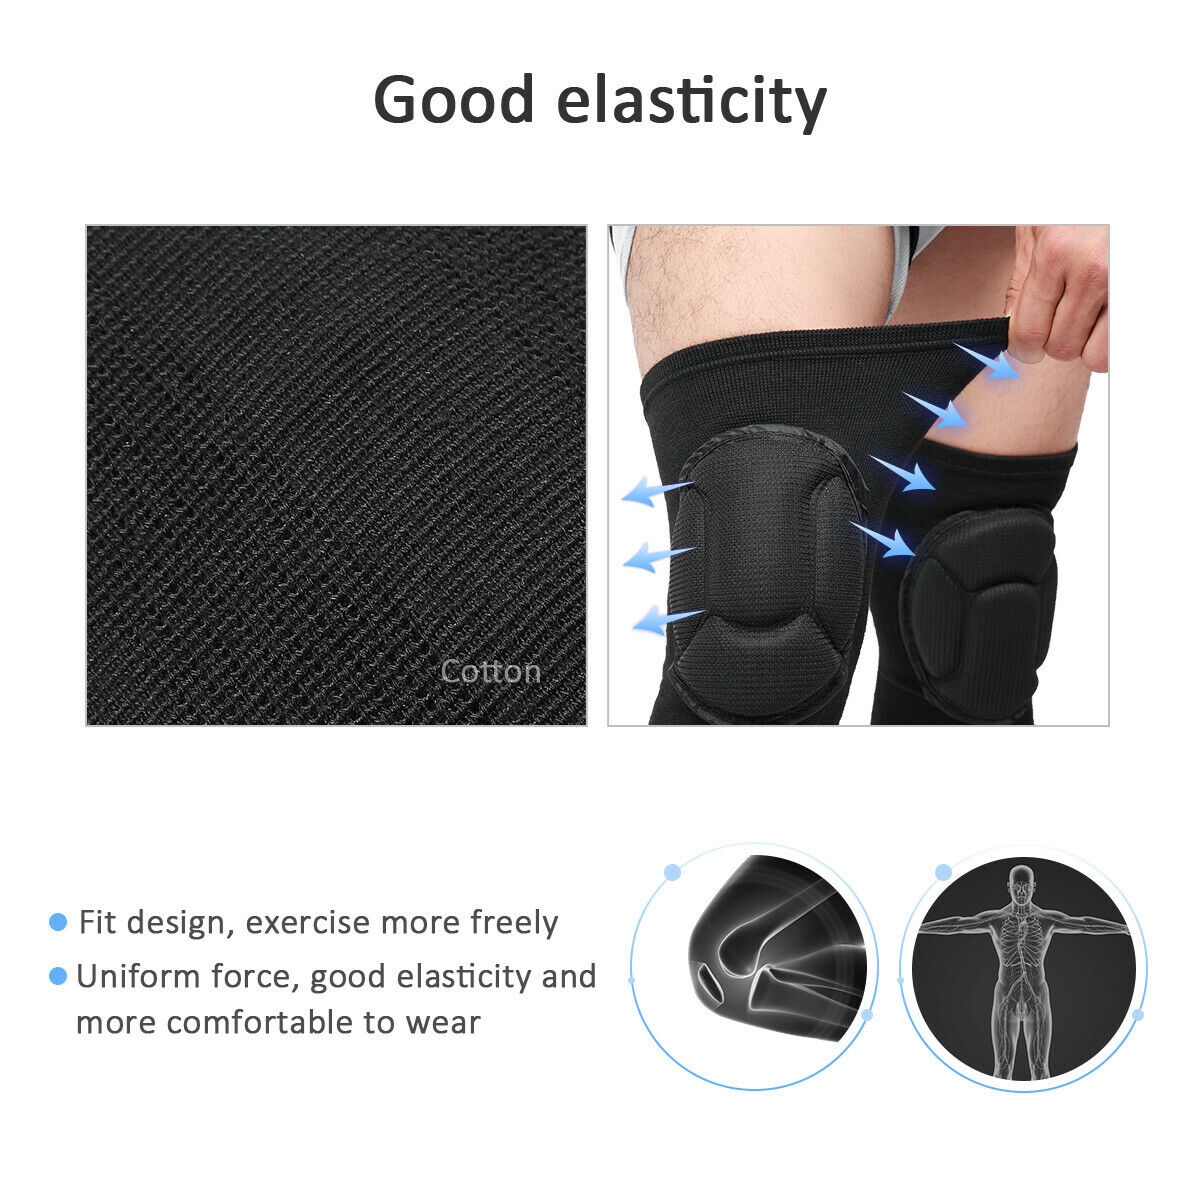 2 x Professional Knee Pads For Sport Work Flooring Construction Leg Protector US Unbranded Does Not Apply - фотография #3